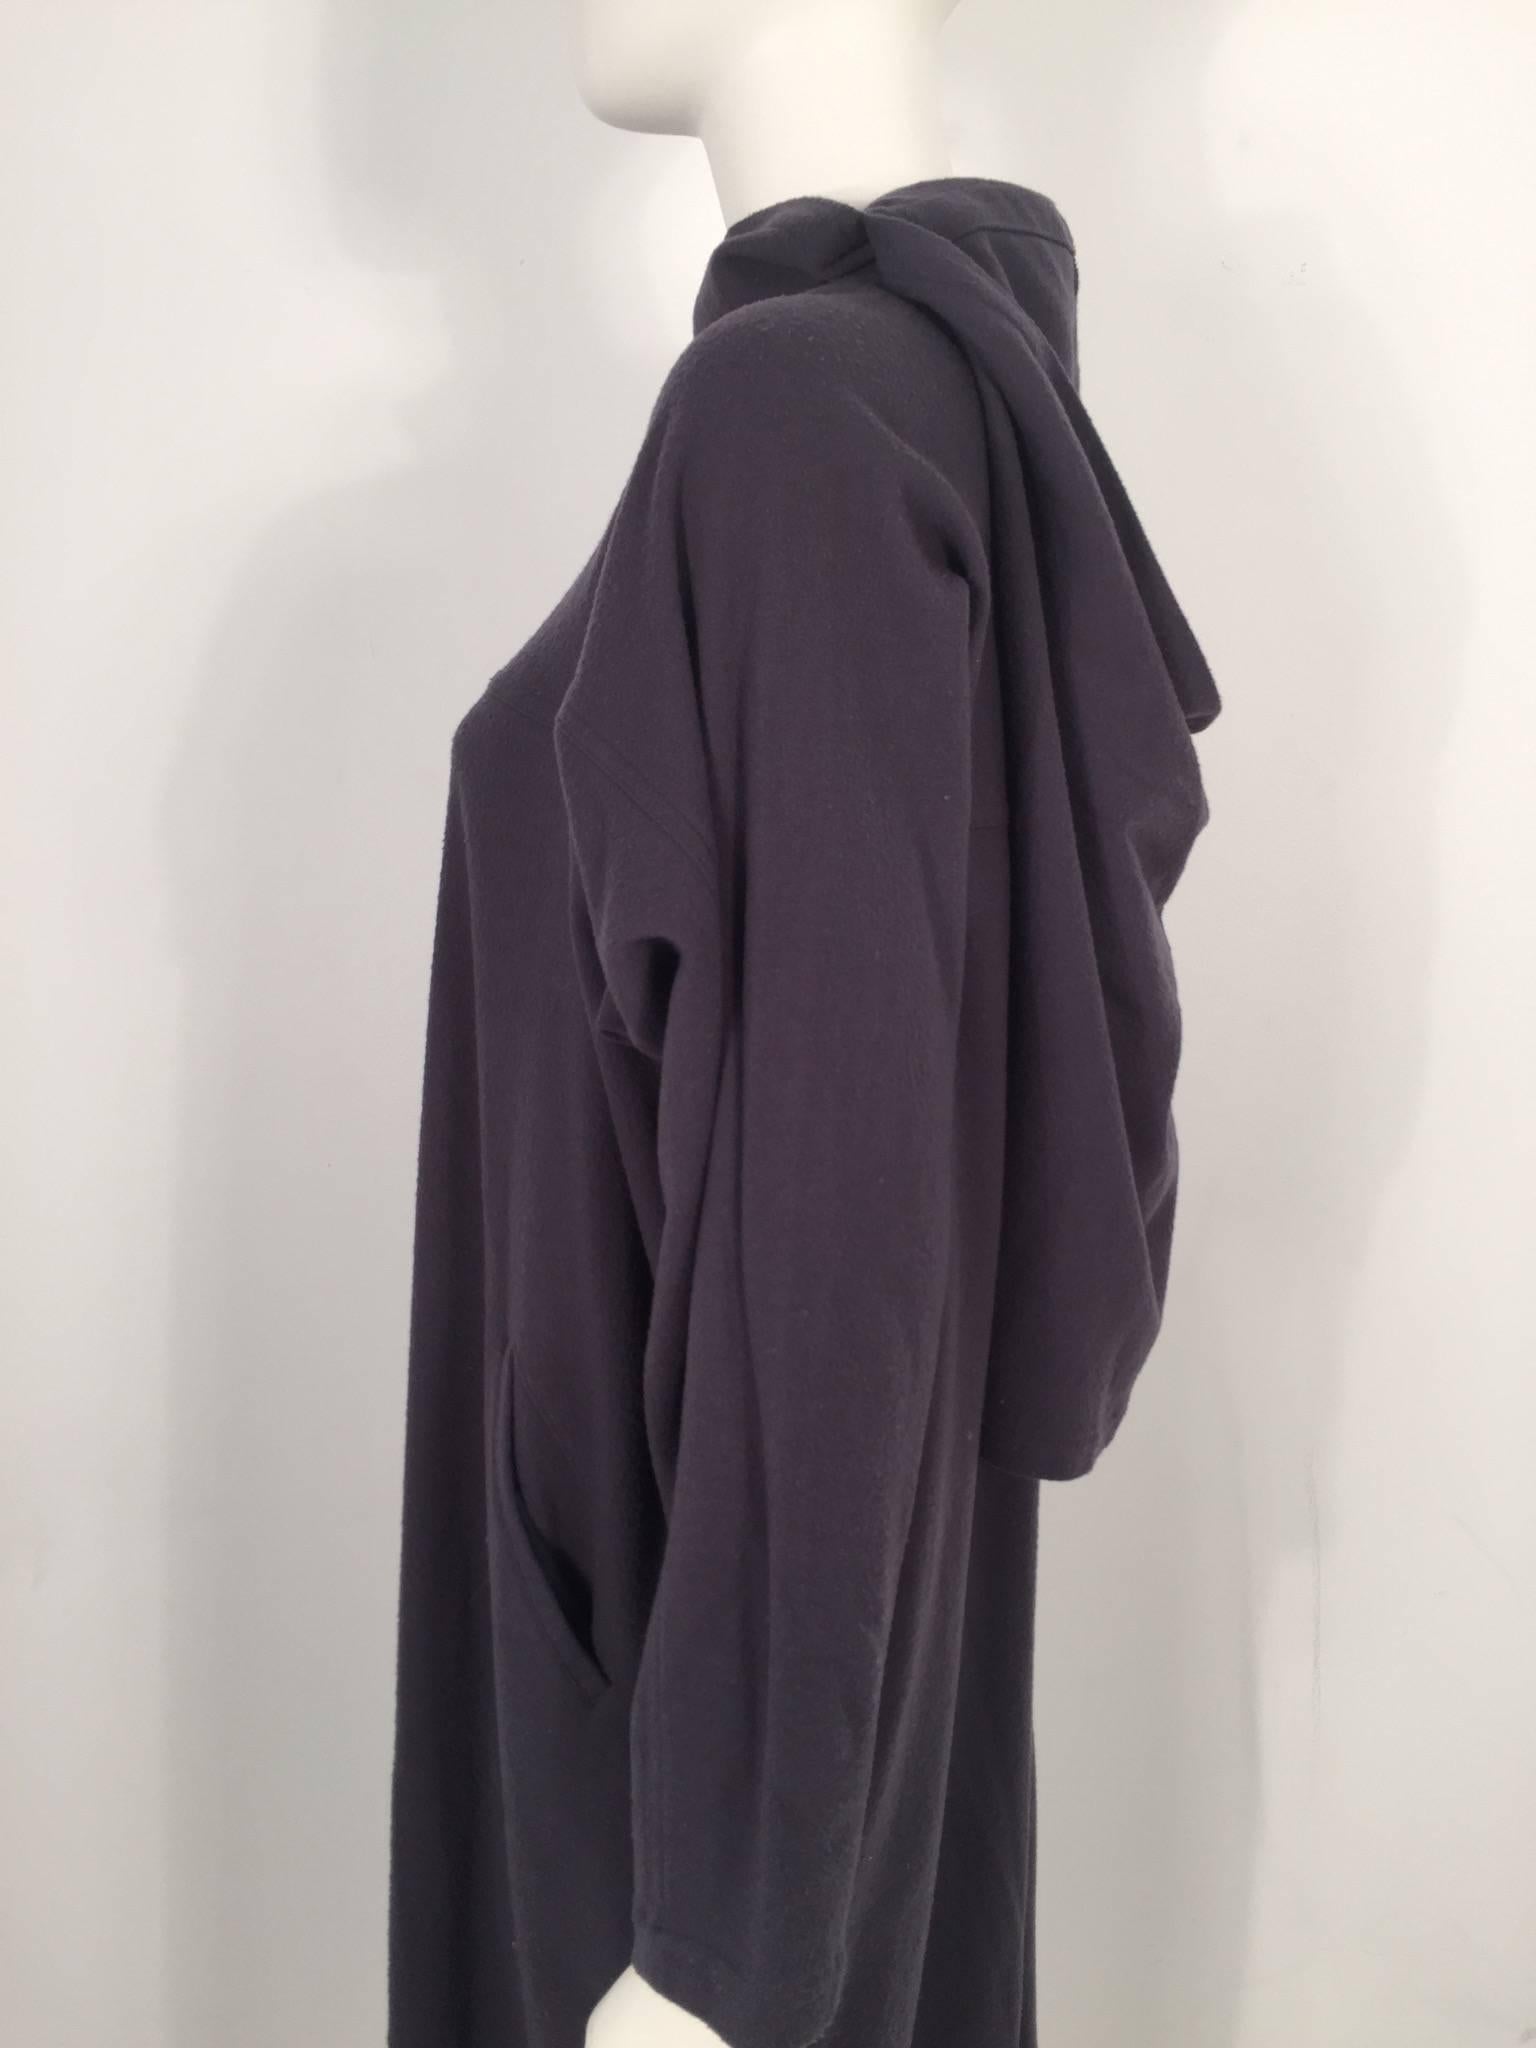 Issey Miyake Iconic Hooded Dress For Sale 1